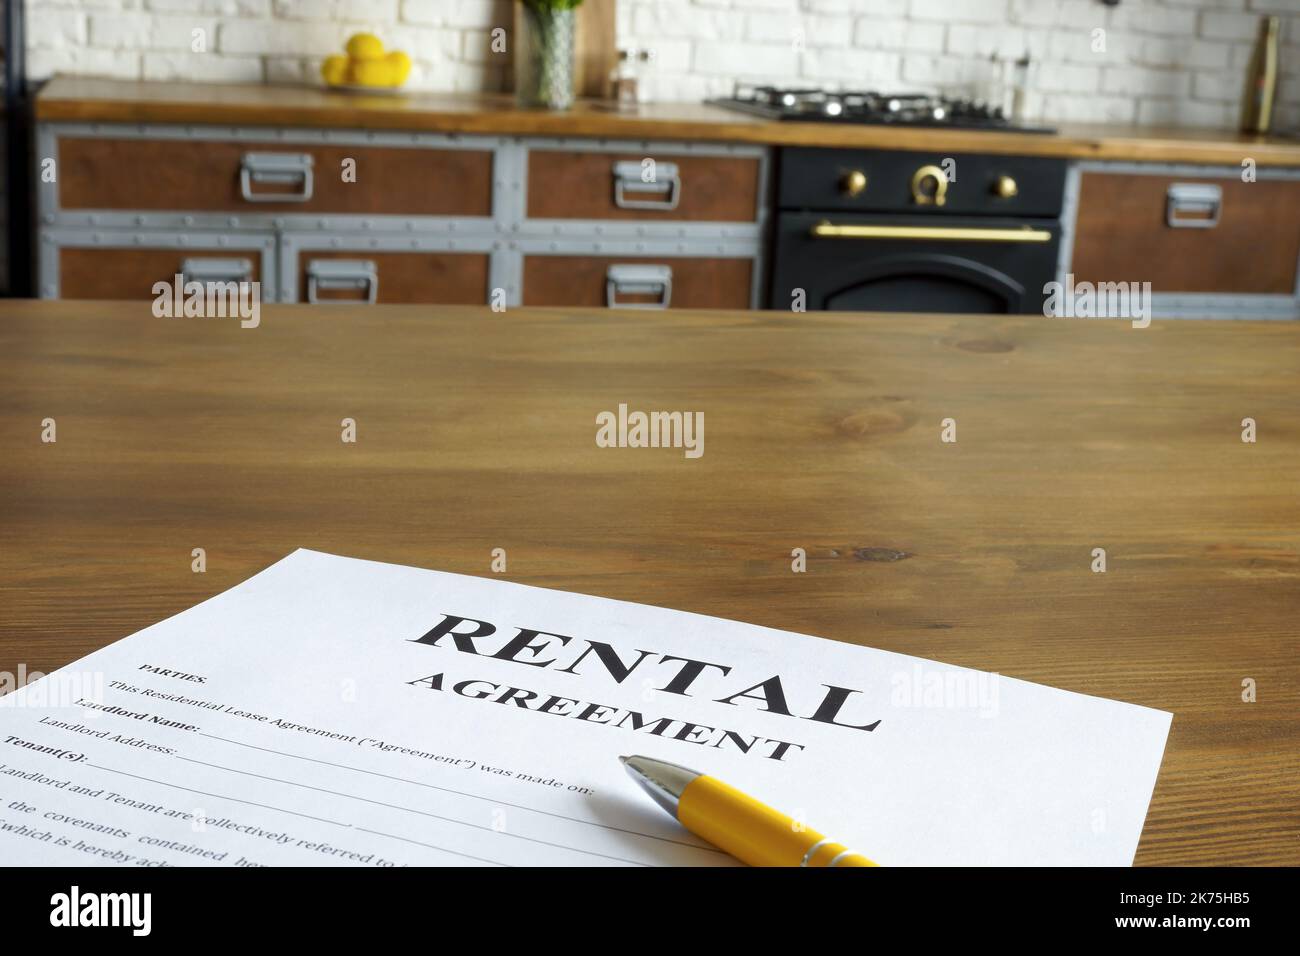 Rental agreement form on the kitchen desk. Stock Photo